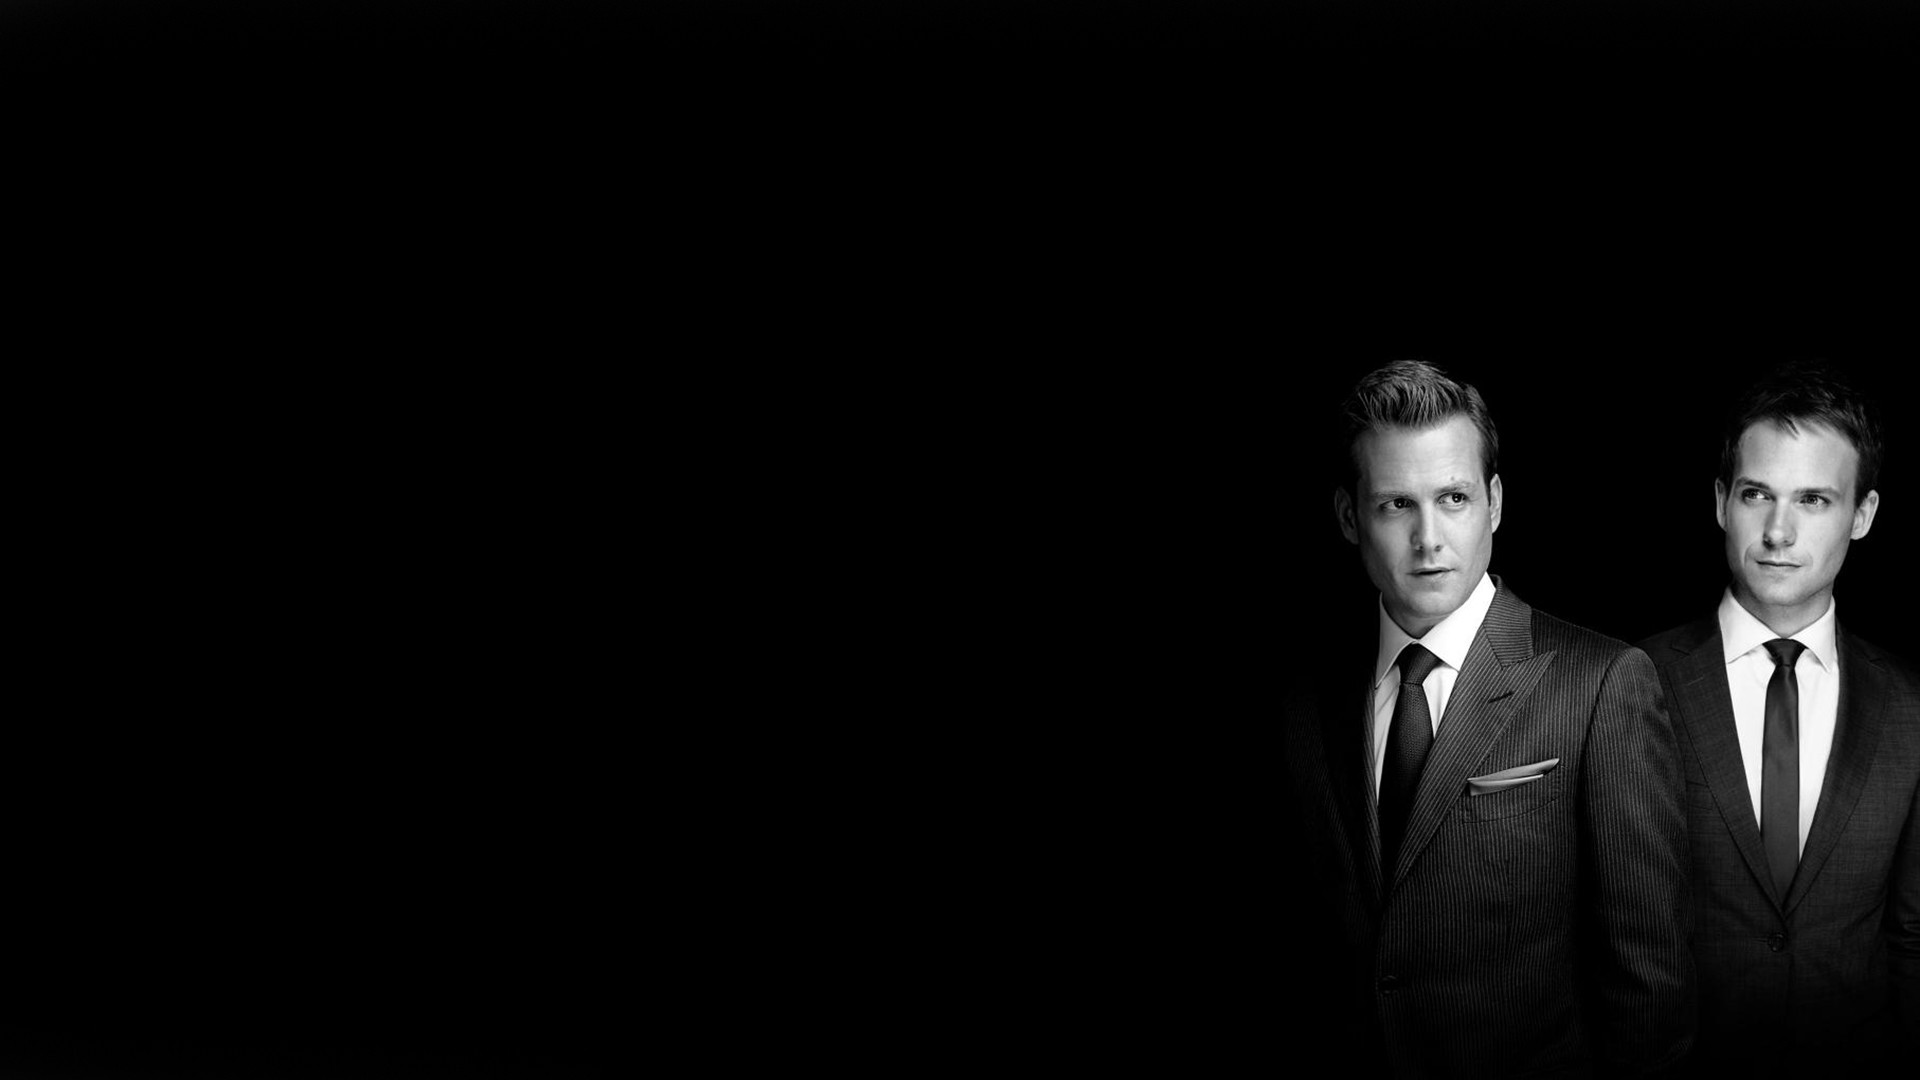 1920x1080 Suits Wallpaper Harvey Specter Saw someone upload their wallpaper .